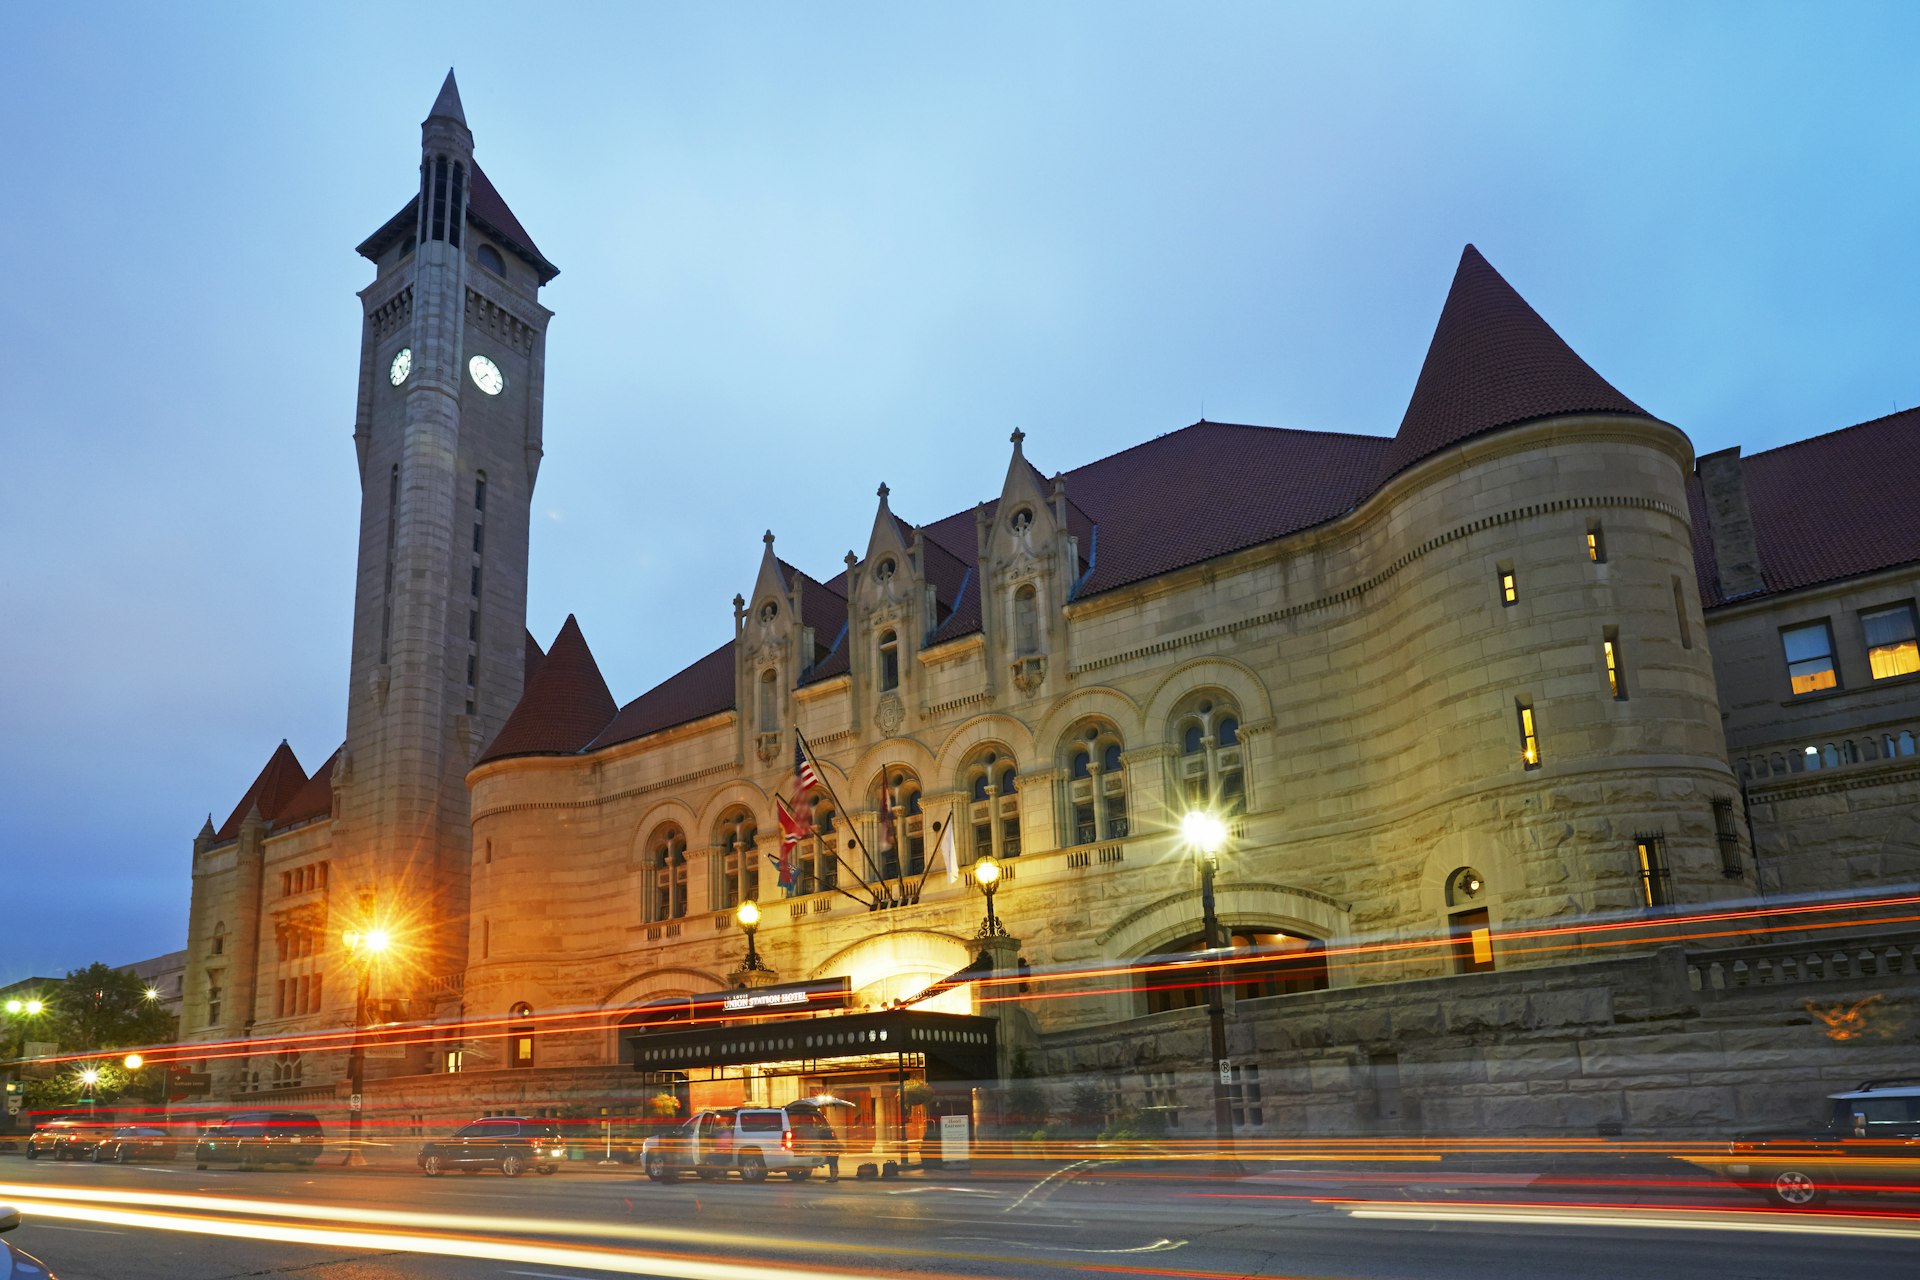 The facade of a grand station building at dusk as lights pass by